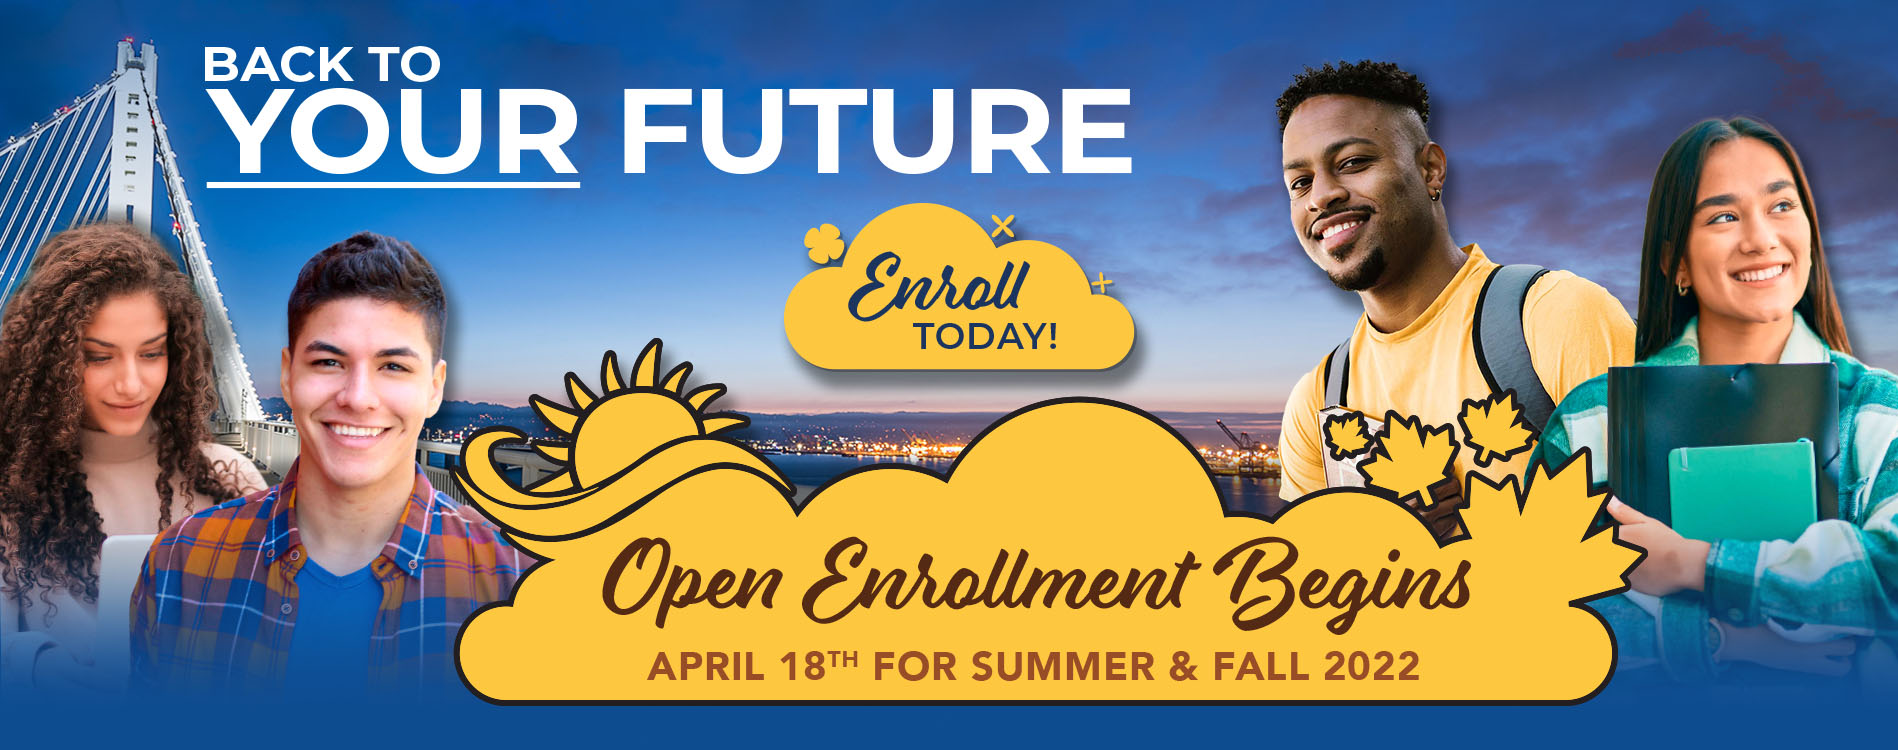 Back to Your Future hero image for Open Enrollment for 2022 Summer & Fall semesters